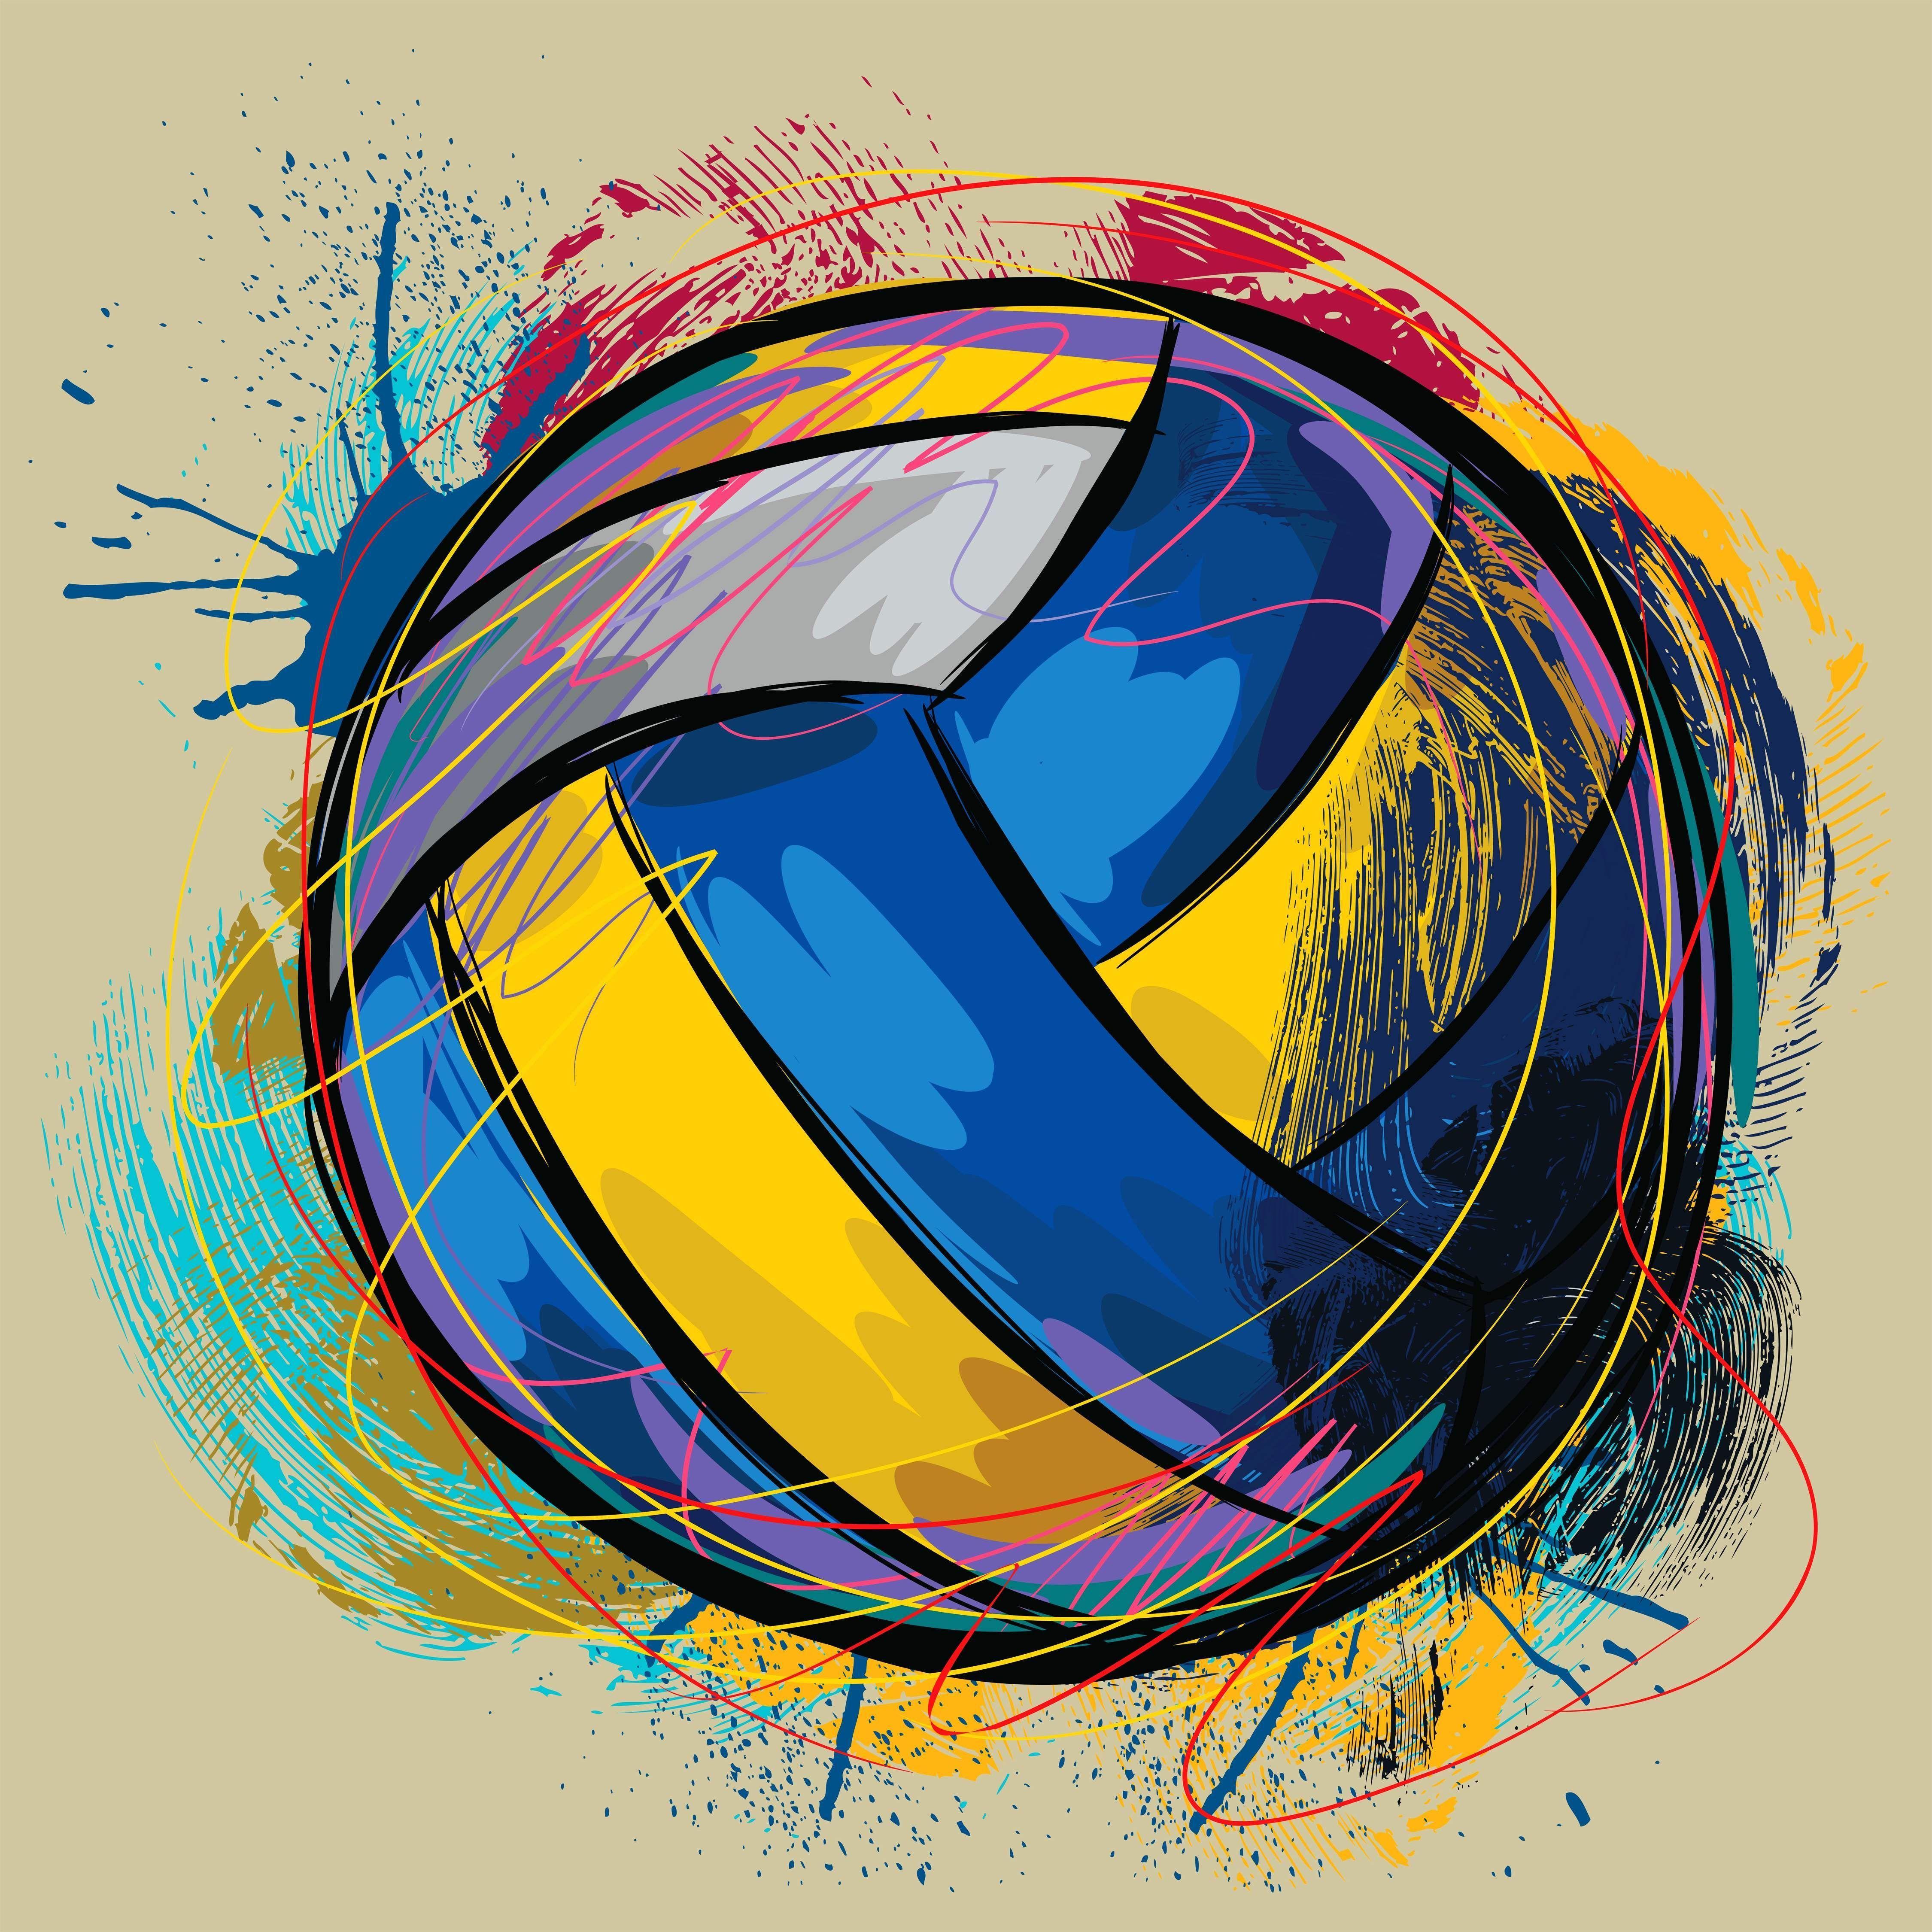 Cool Volleyball Wallpapers - Top Free ...